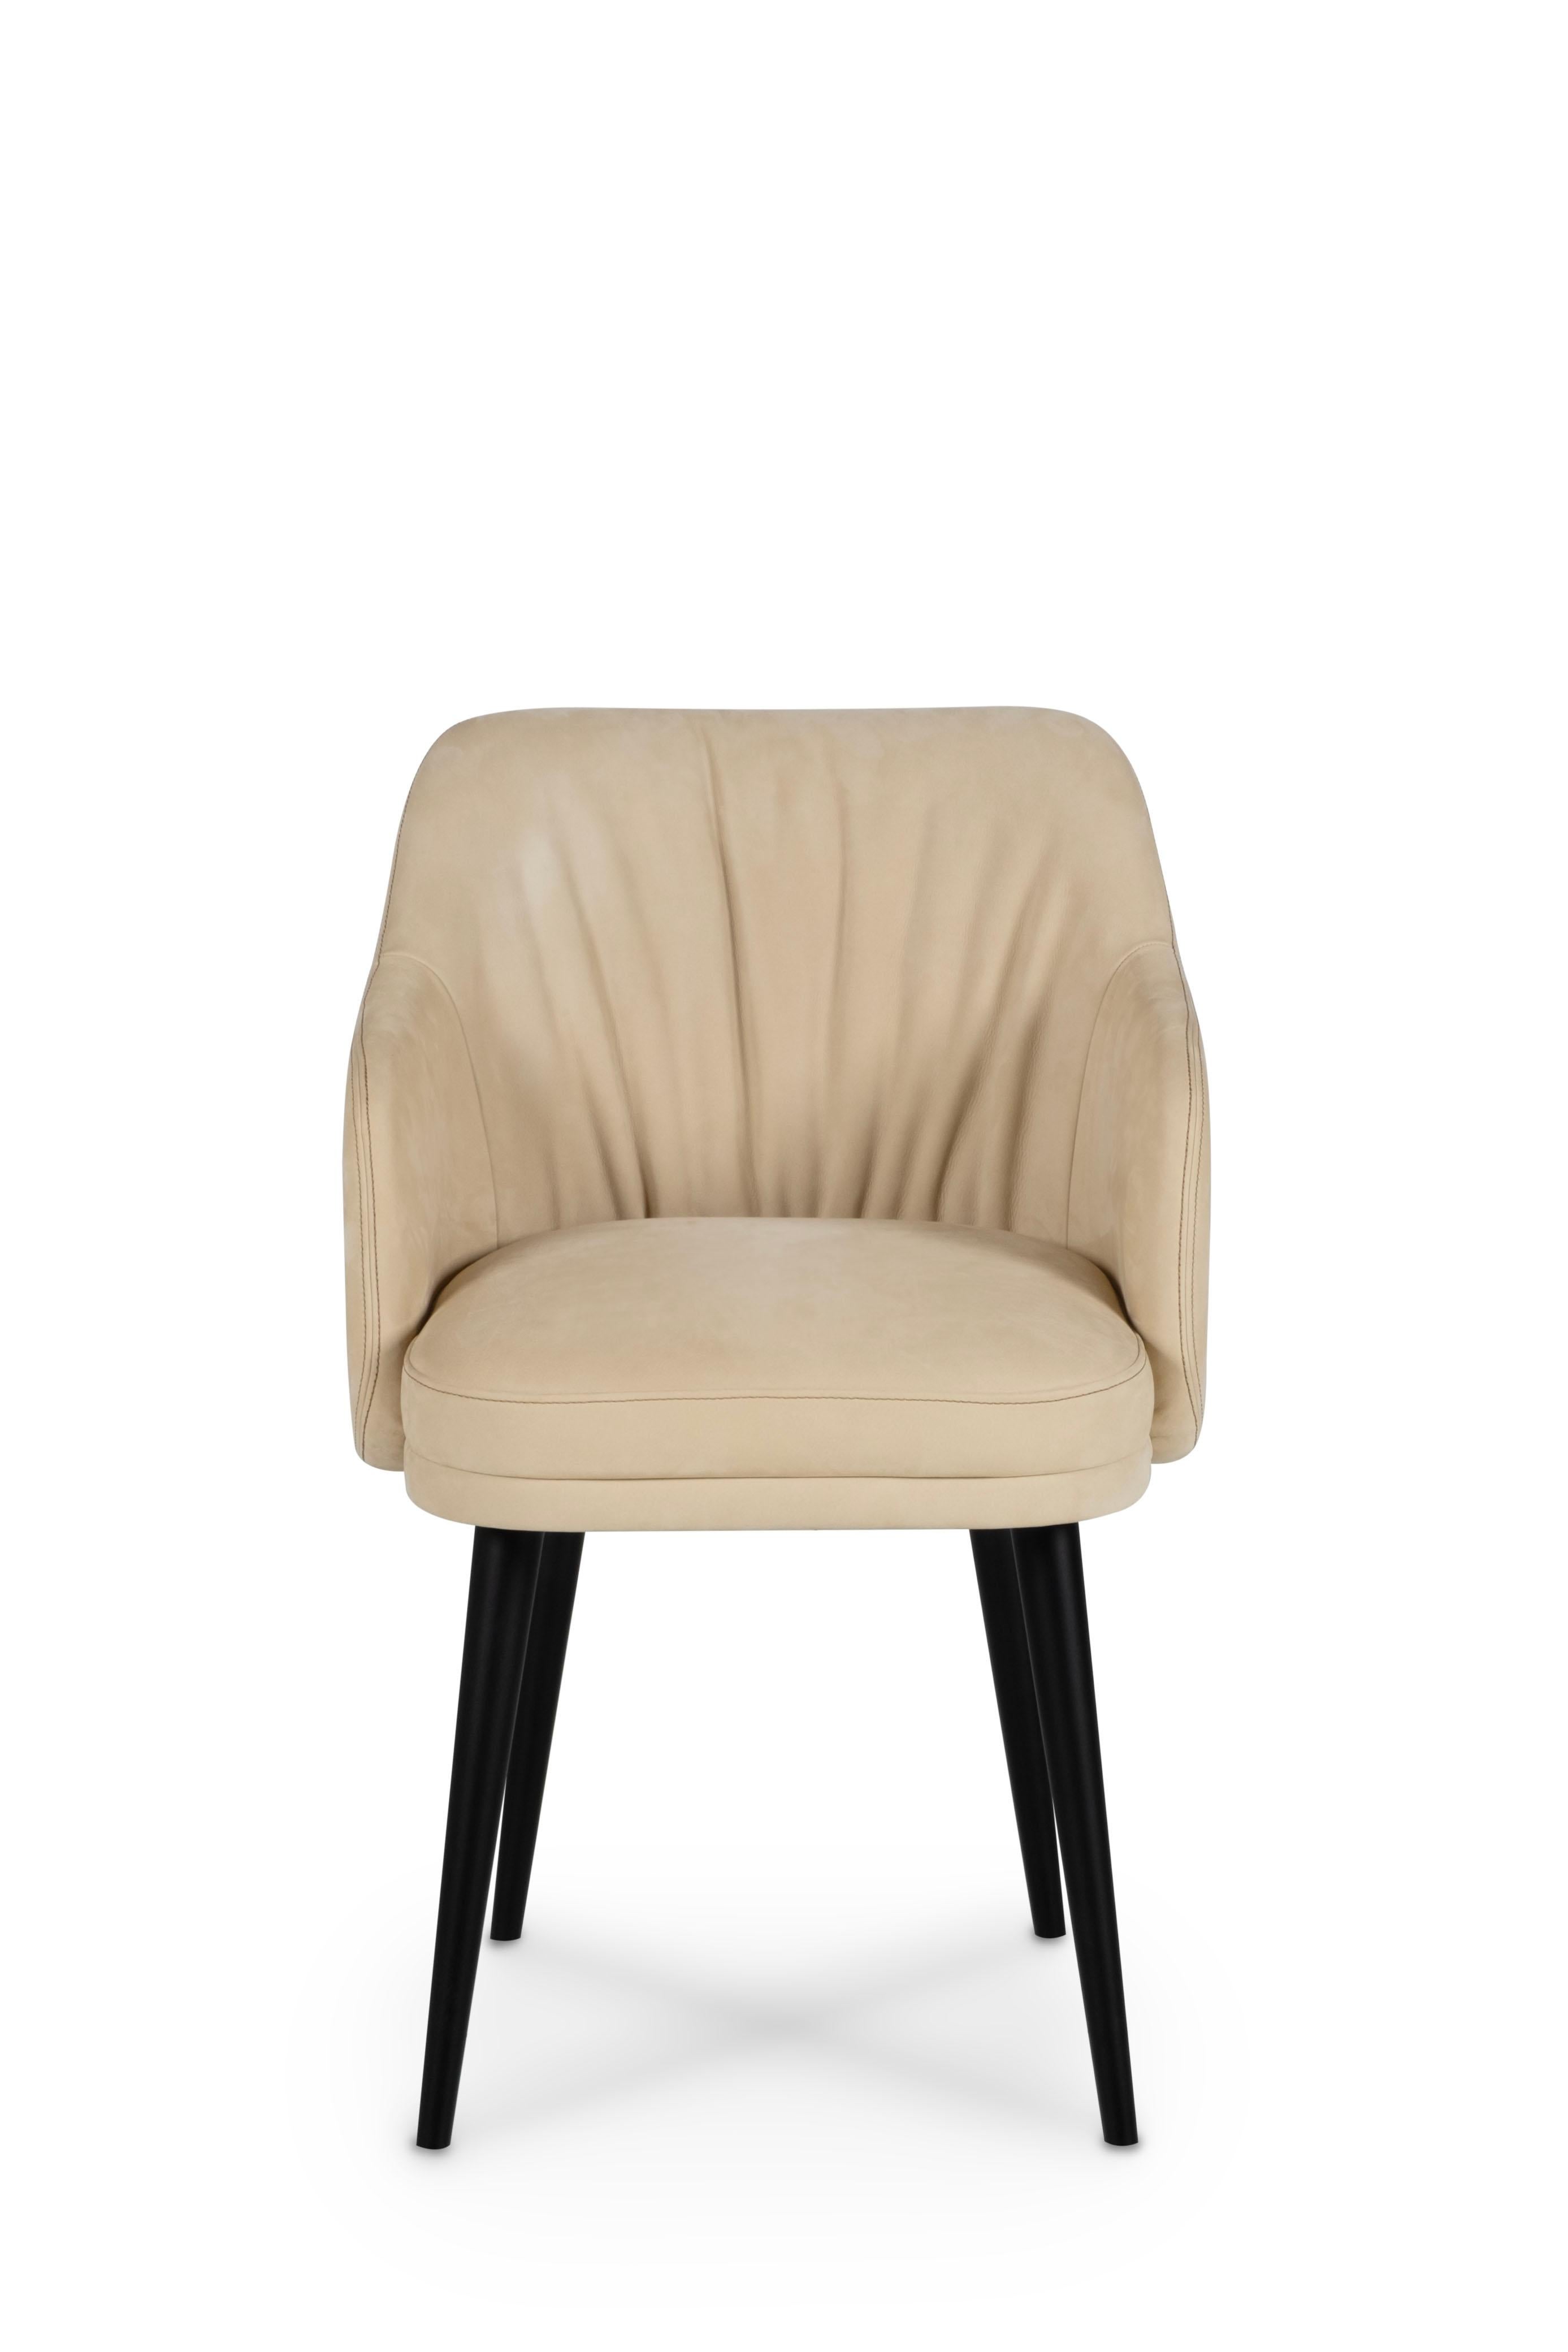 Portuguese Modern Margot Dining Chairs, Nubuck Leather, Handmade in Portugal by Greenapple For Sale